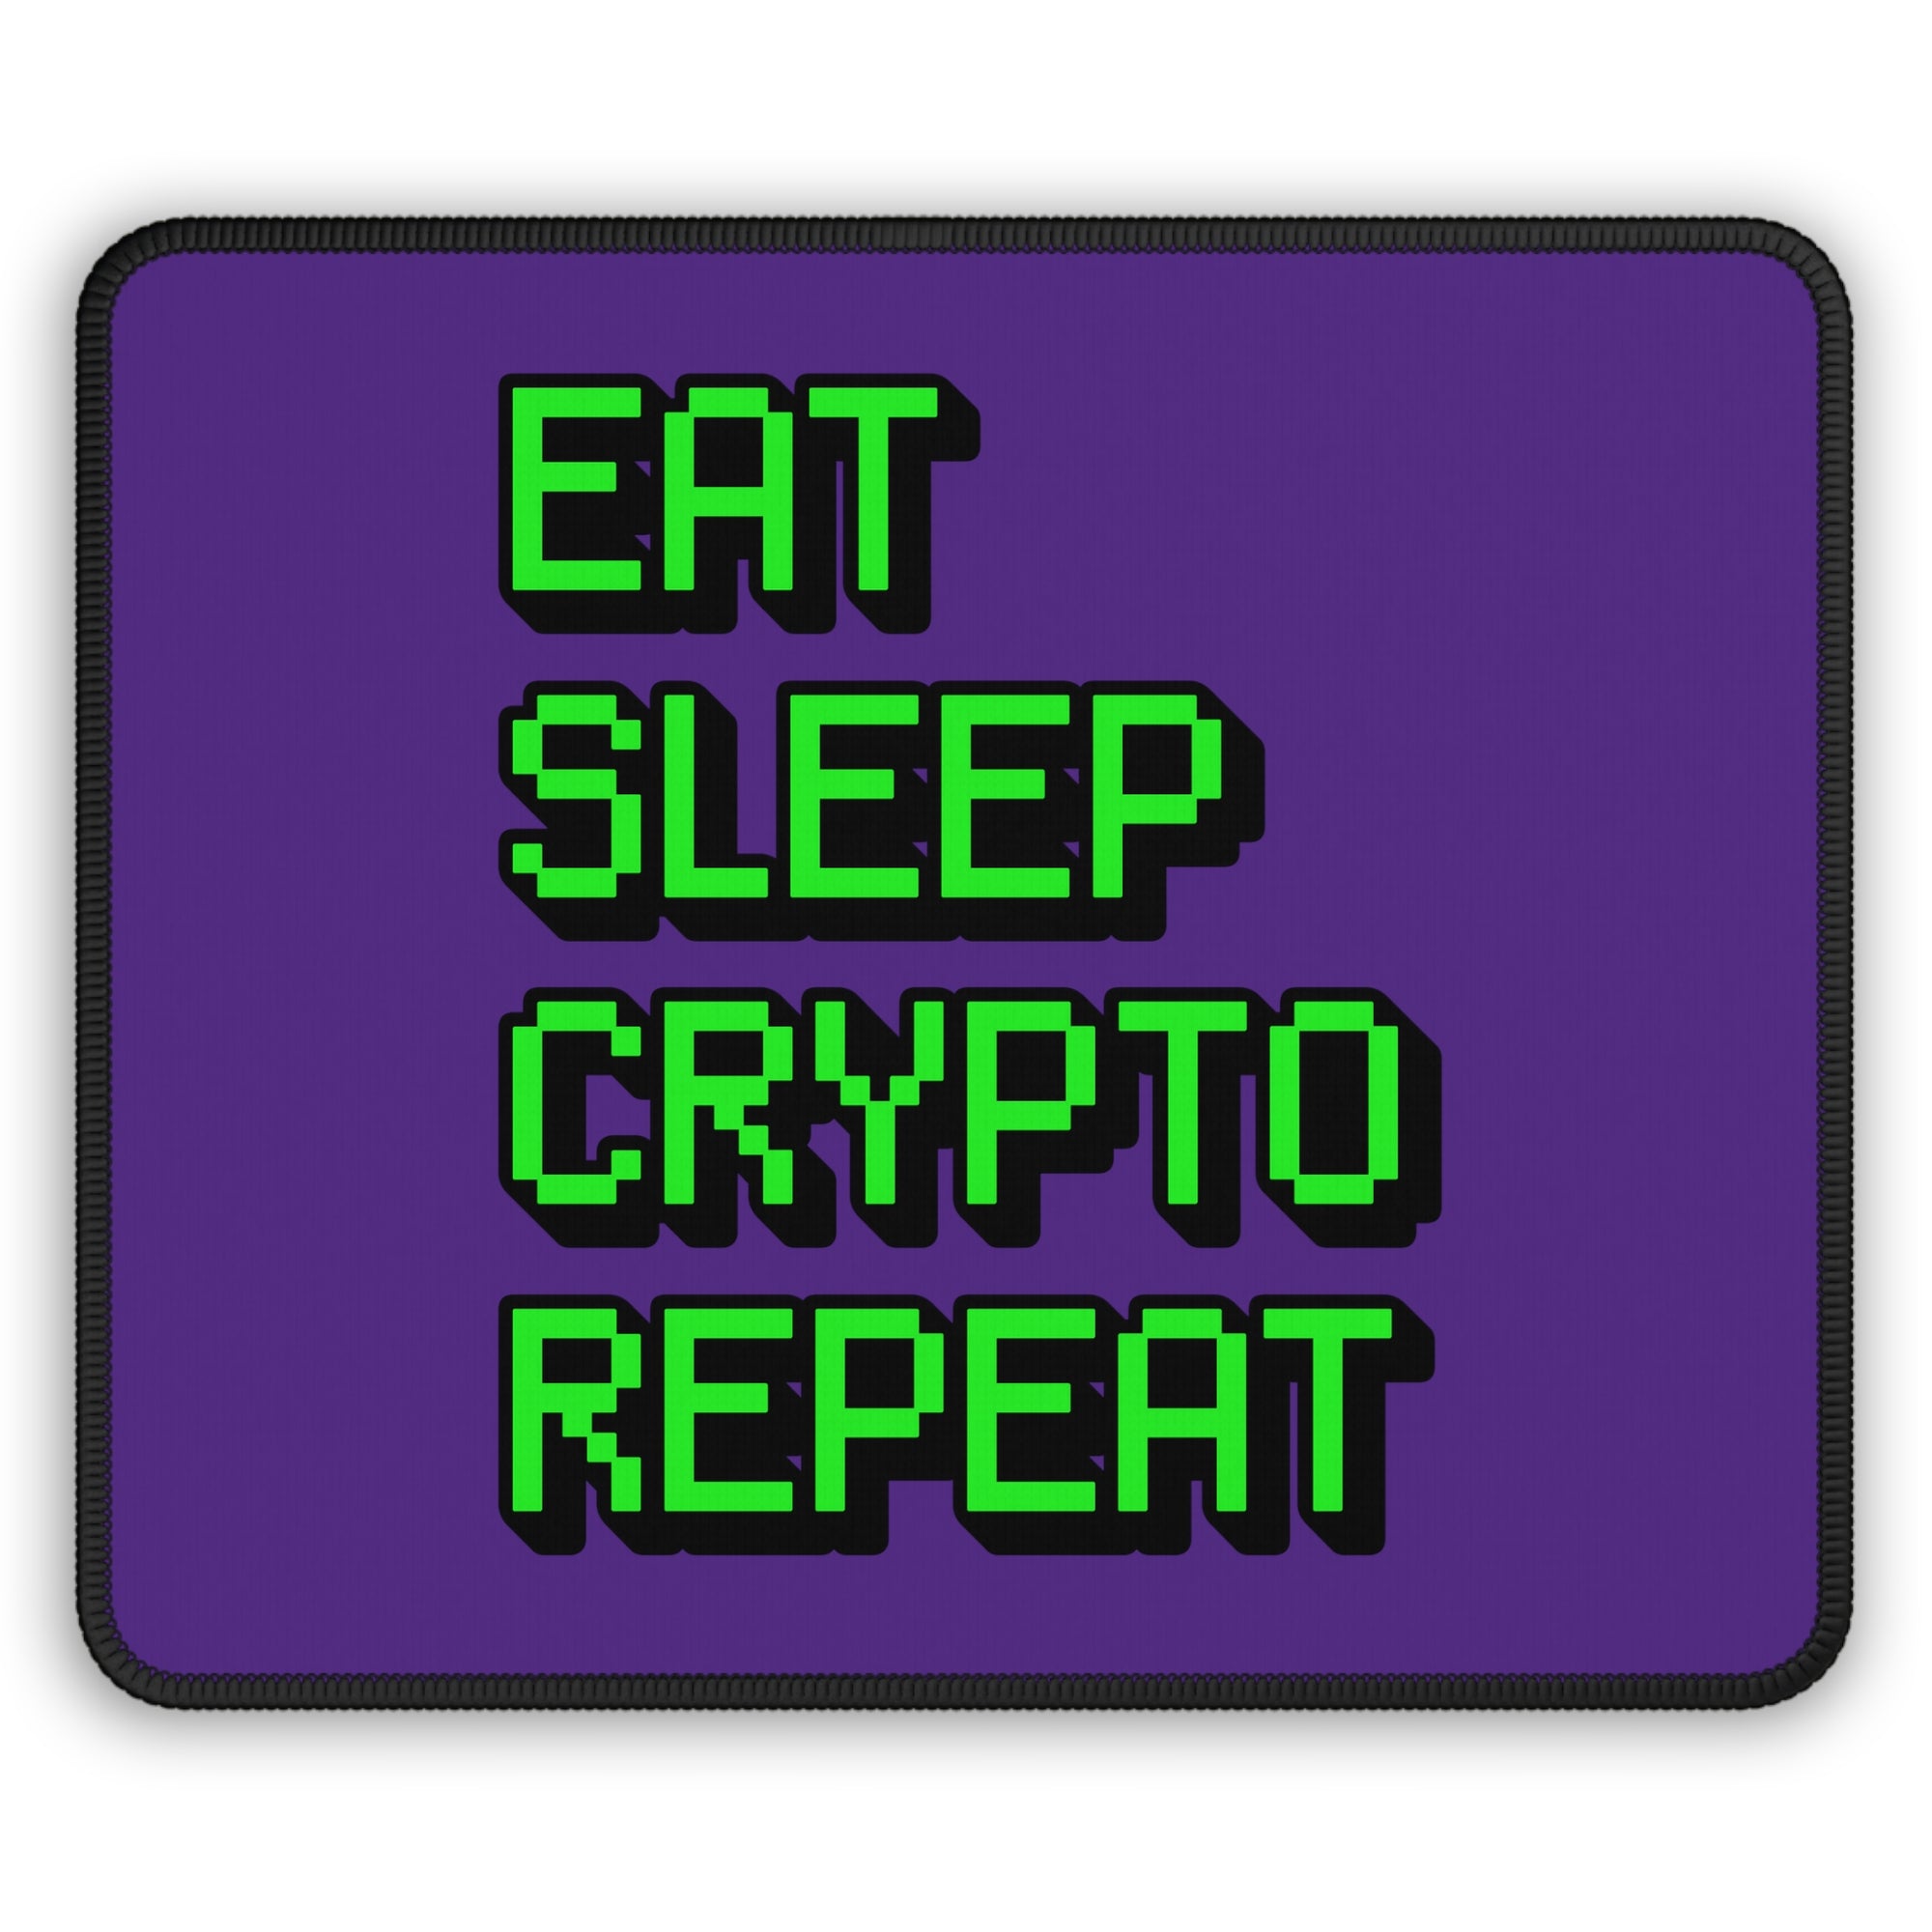 Crypto Merchandise - Eat Sleep Crypto Repeat Mouse Pad Close Up View.